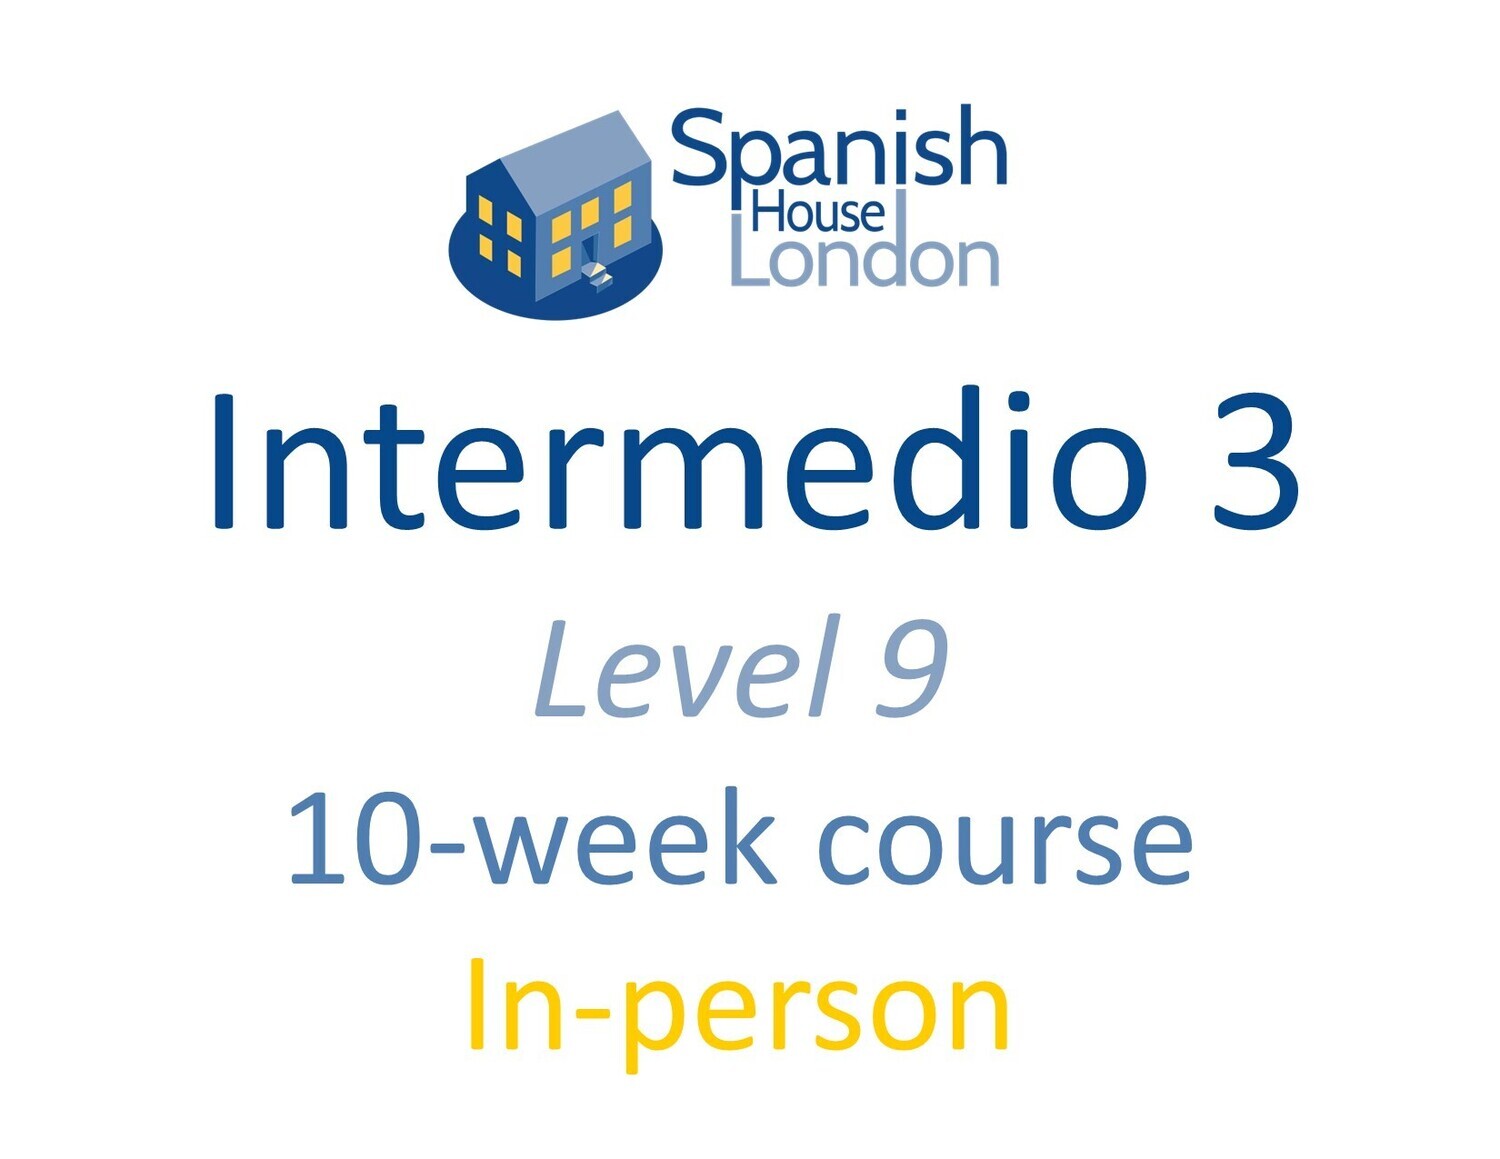 Intermedio 3 Course starting on 27th November at 6pm in Clapham North